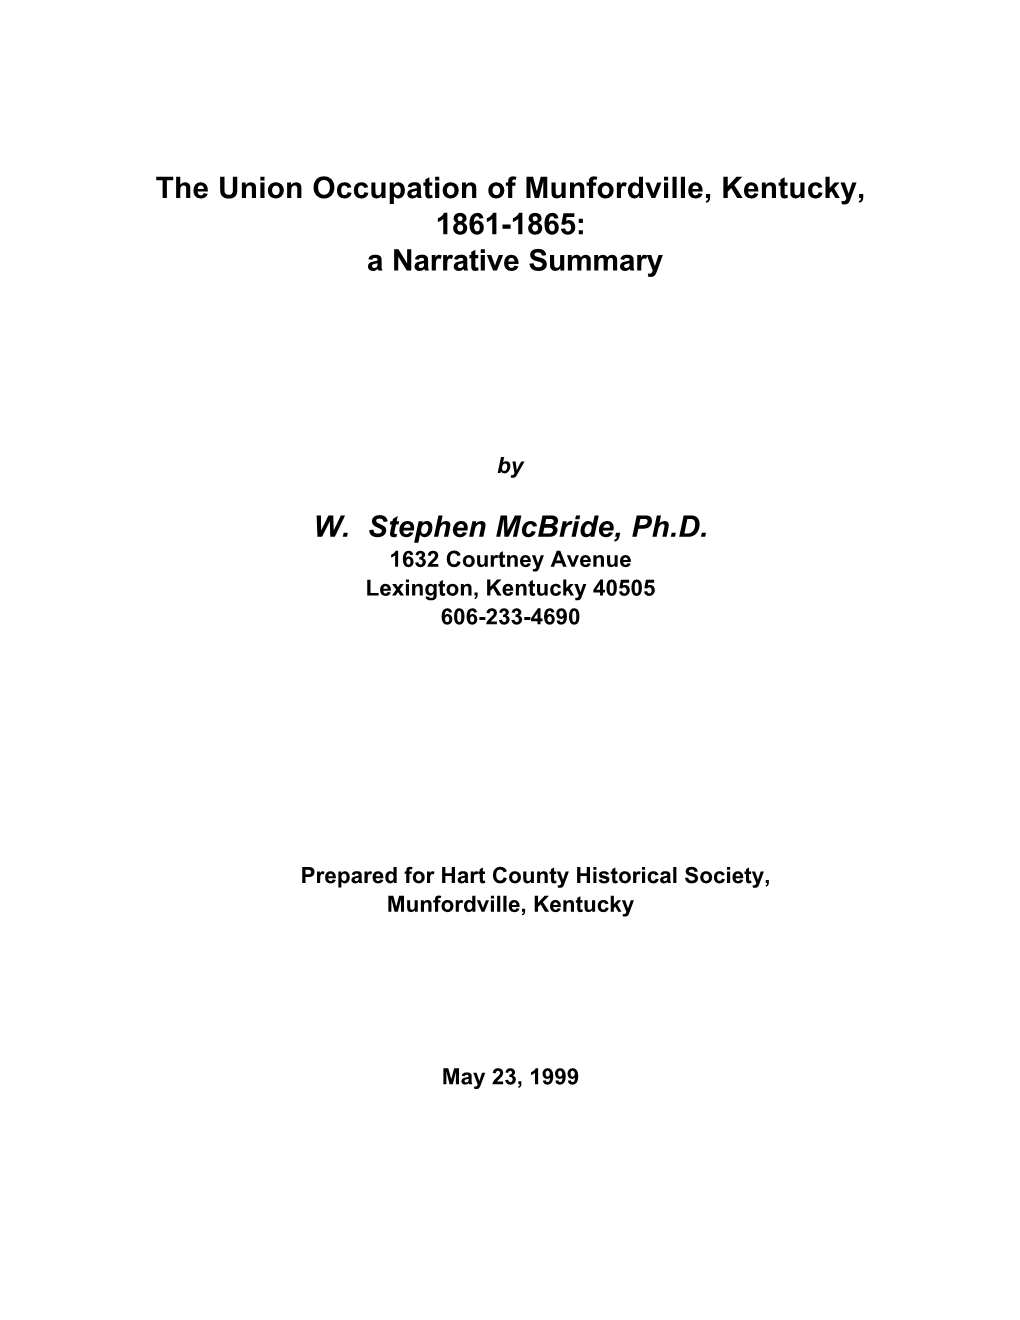 The Union Occupation of Munfordville, Kentucky, 1861-1865: a Narrative Summary